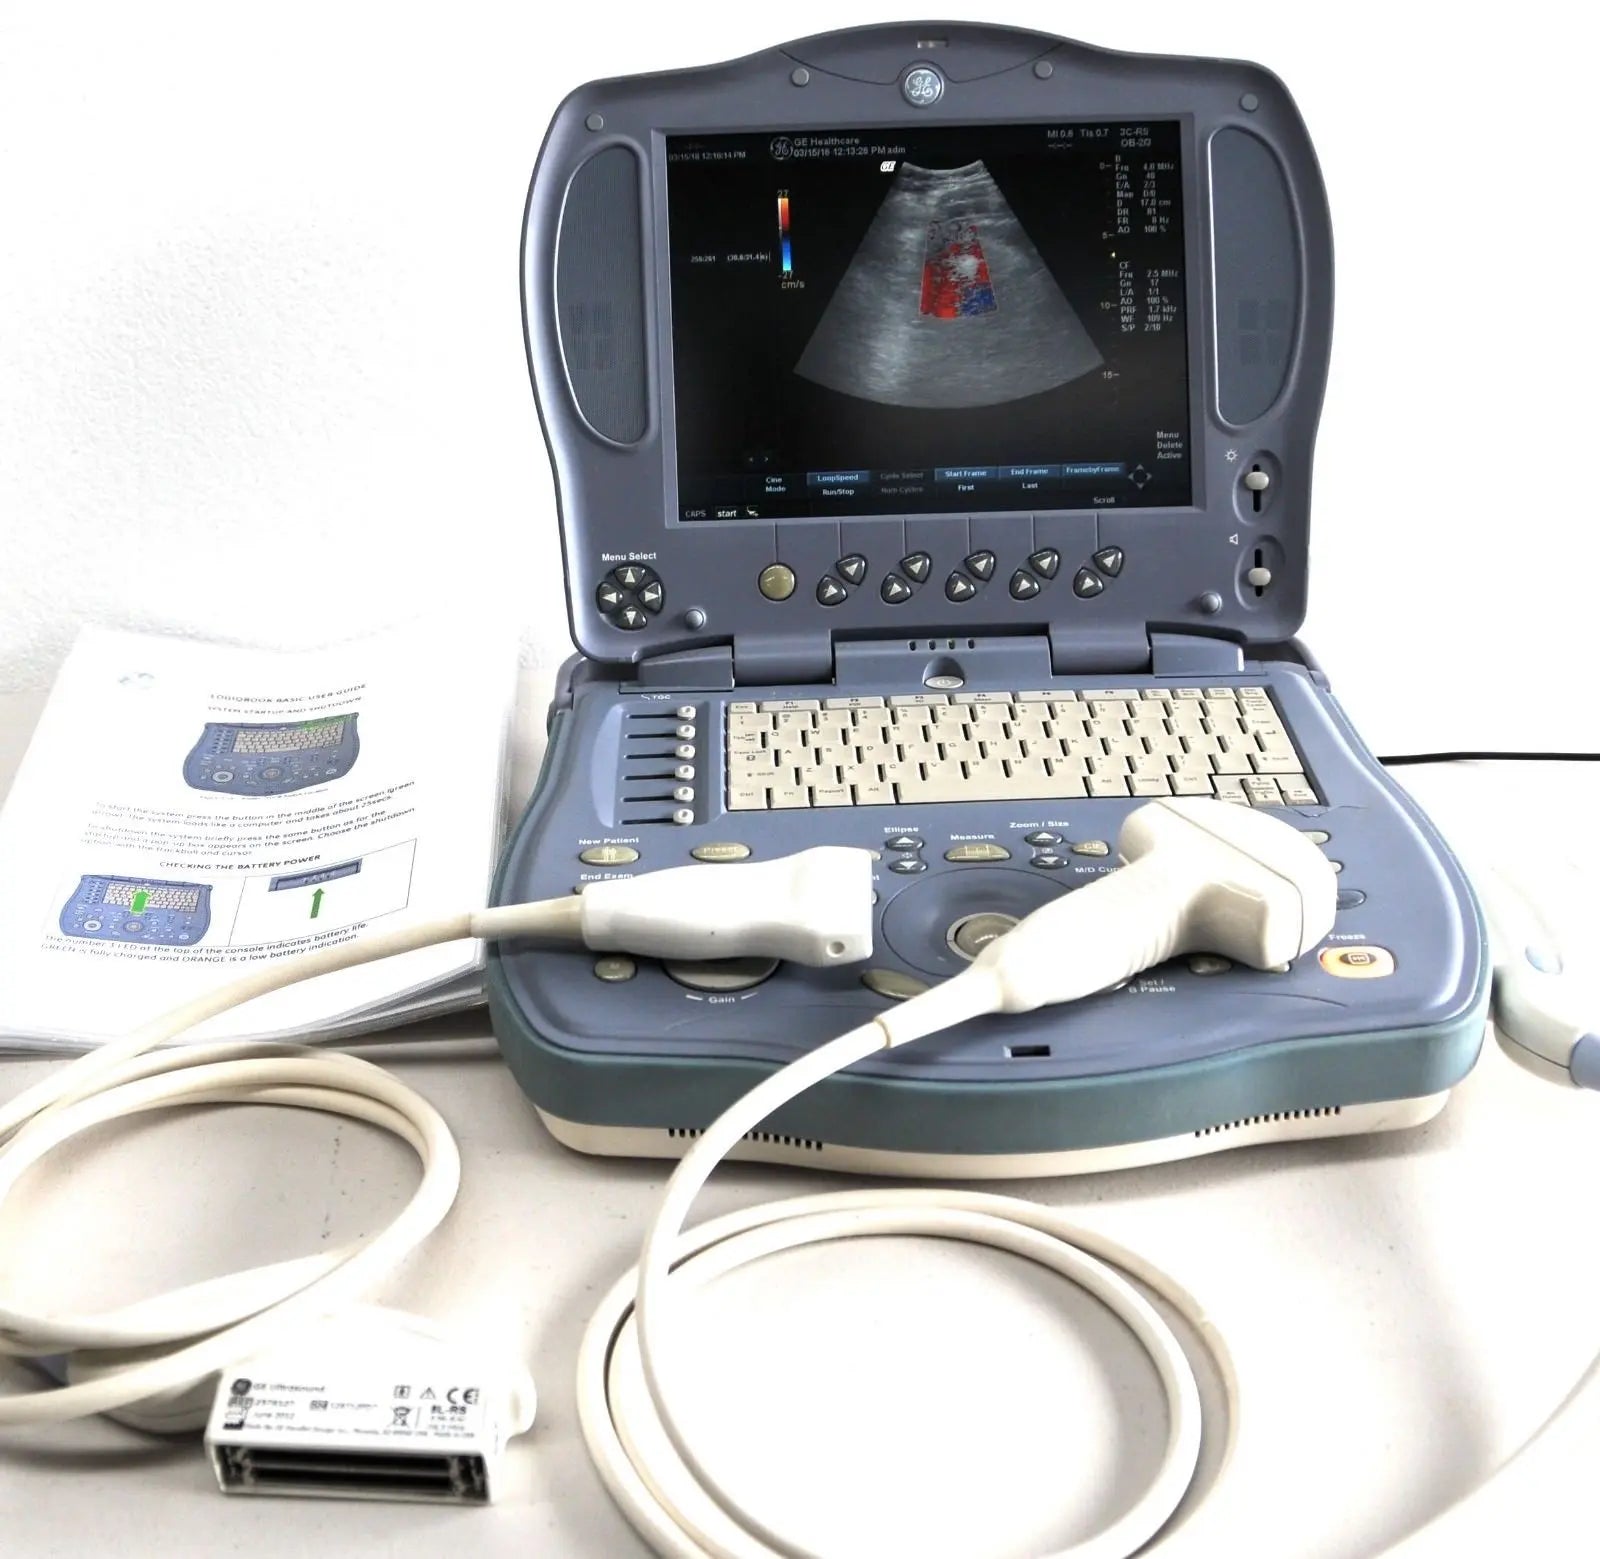 GE Logiq Book XP with 2 x Ultrasound Probes. Linear and Convex 2011 DIAGNOSTIC ULTRASOUND MACHINES FOR SALE